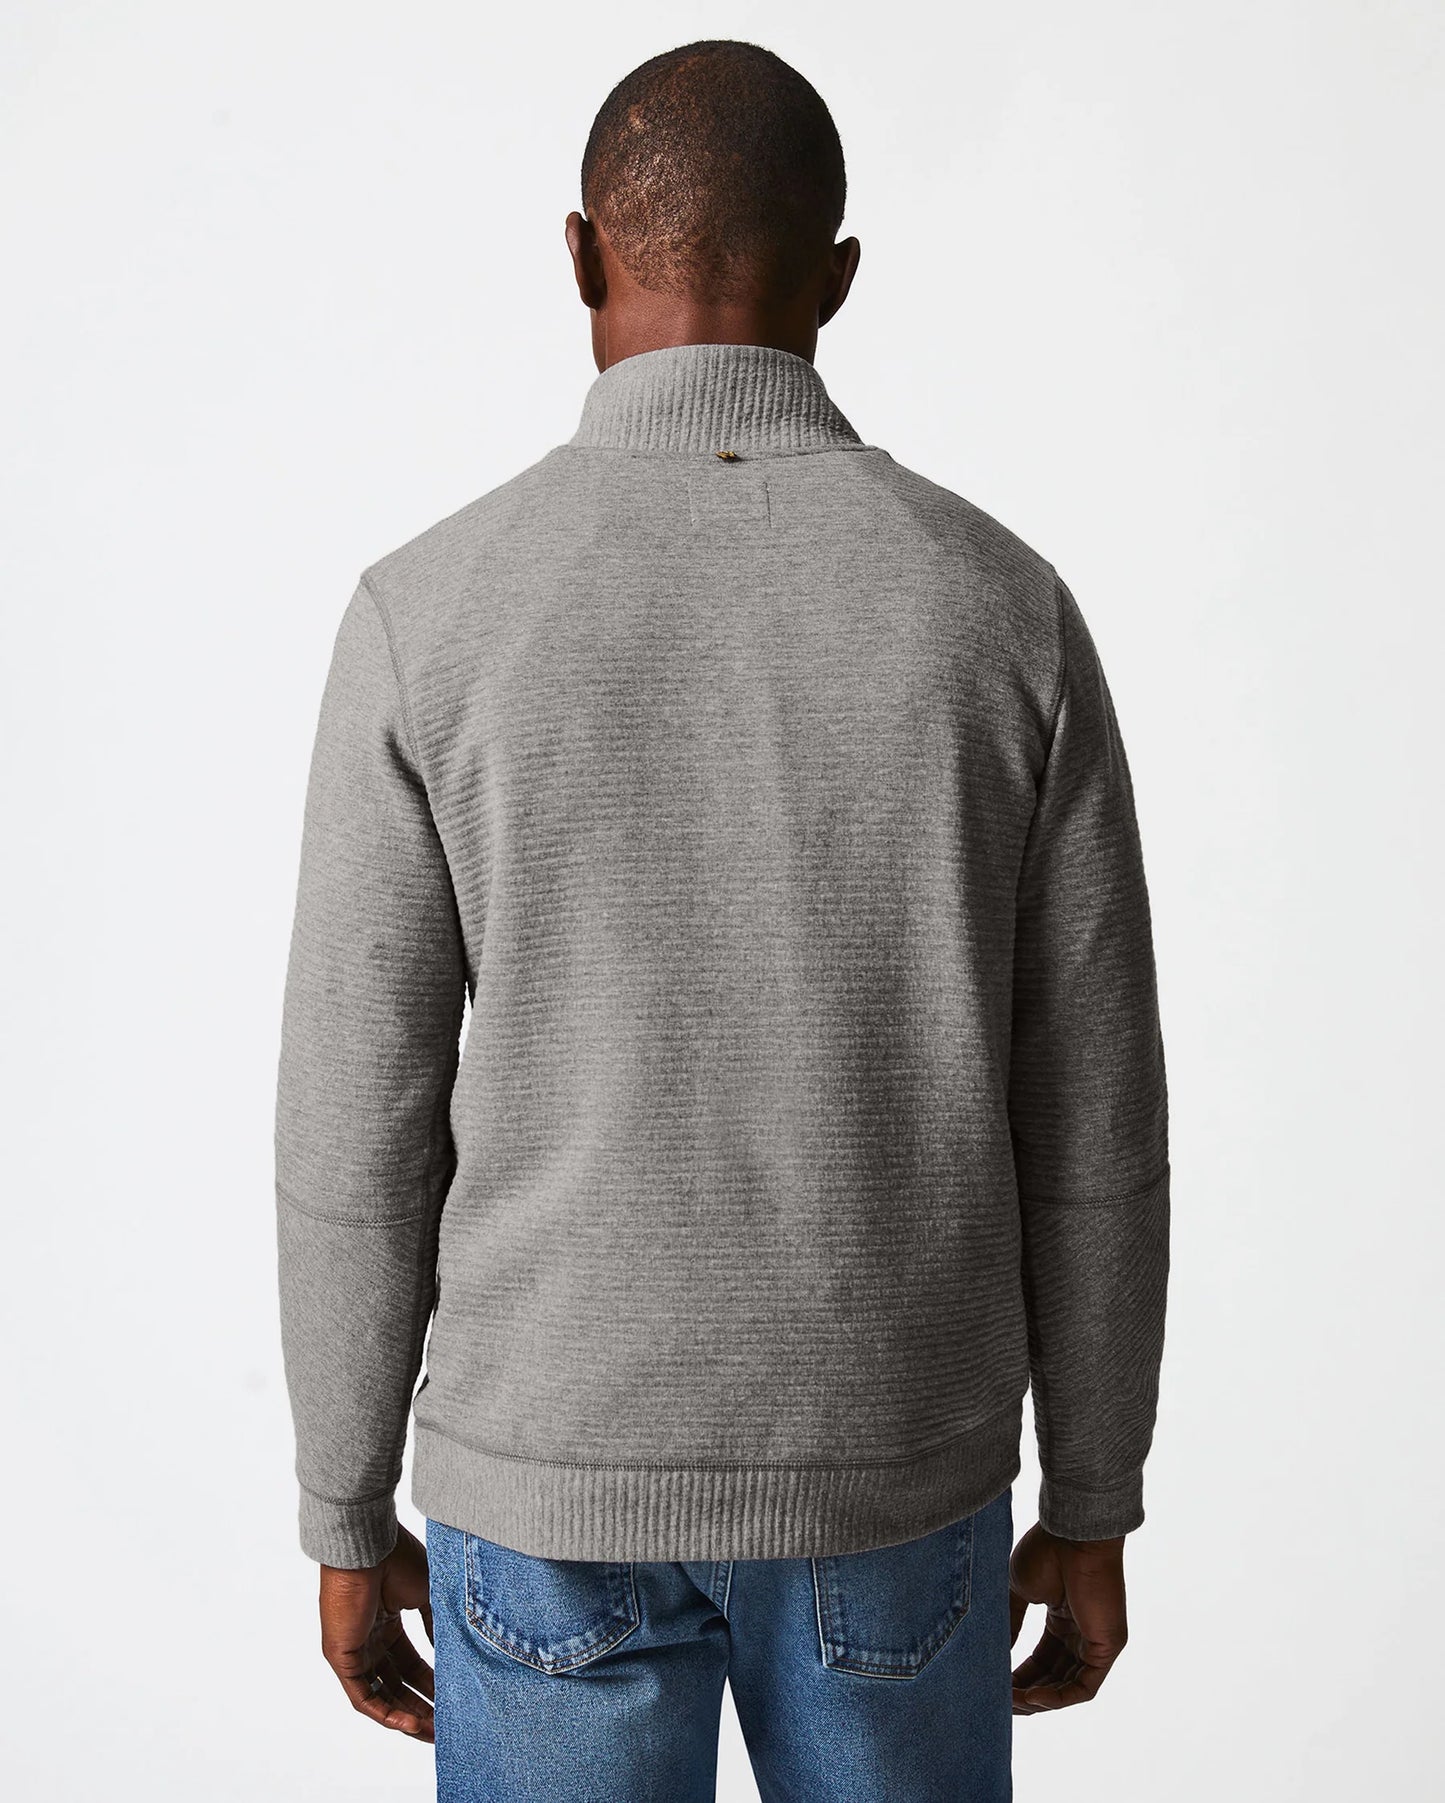 Back view of man wearing a grey quilted half zip pullover sweater by Billy Reid